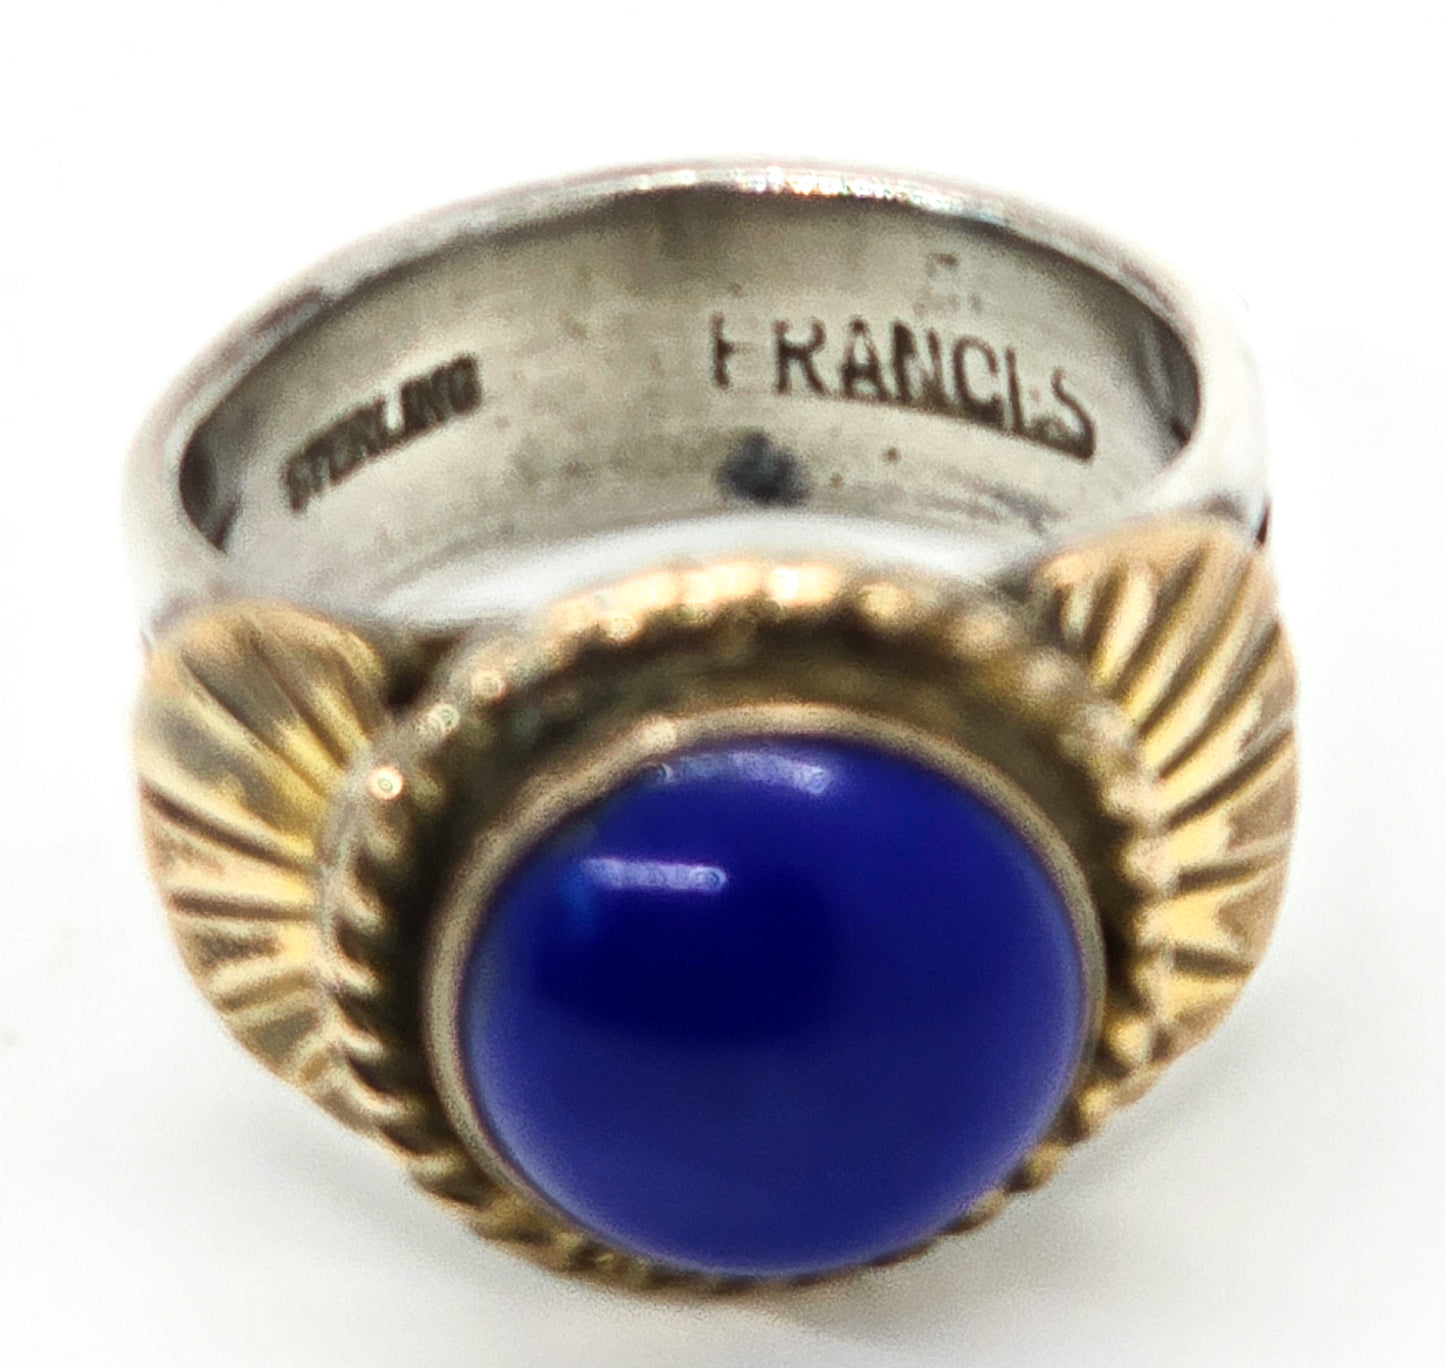 Francis Art Deco Lapis Lazuli Gold filled sterling silver vintage statement ring size 6